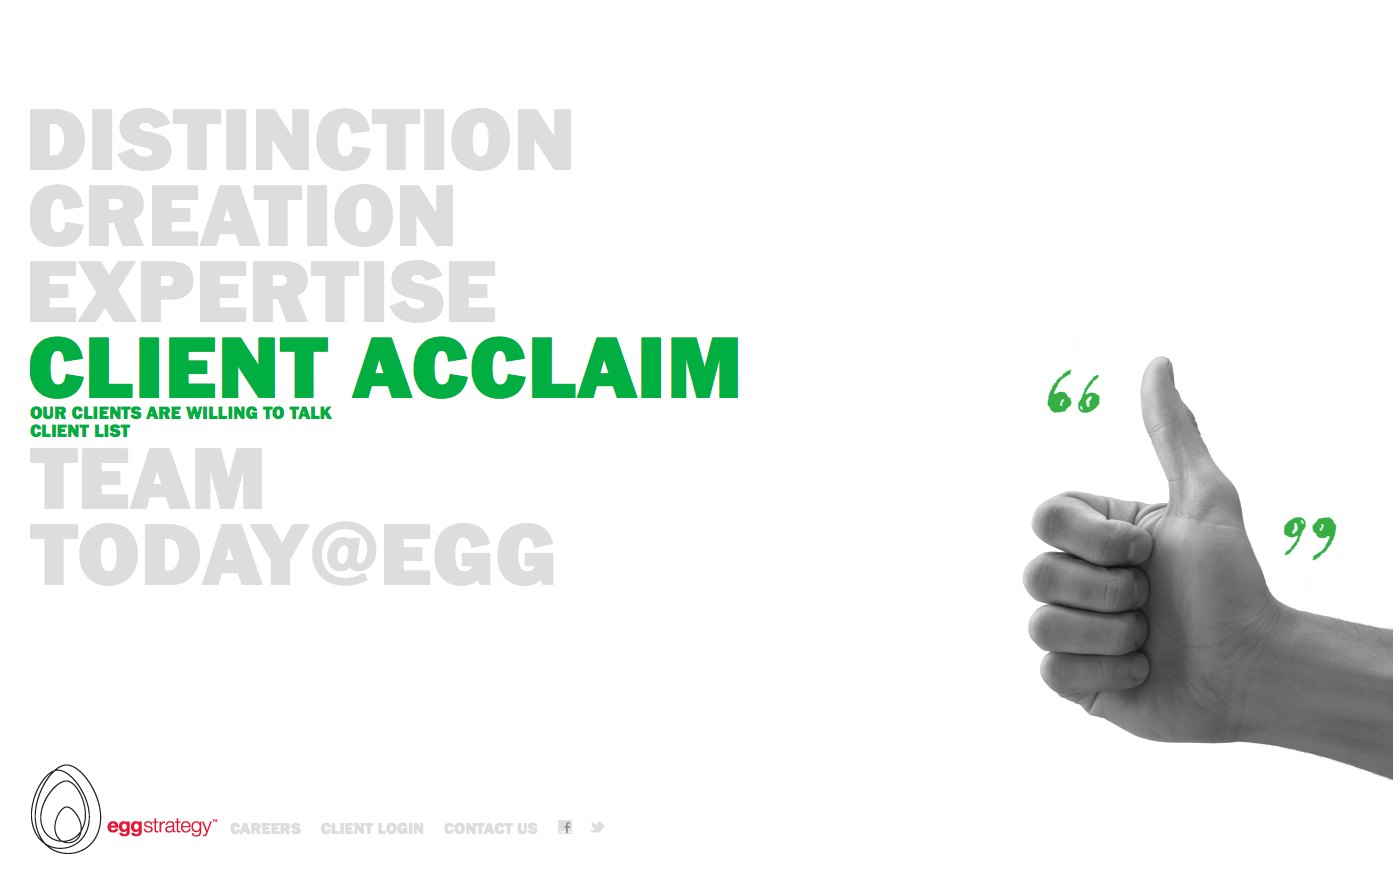 Project image 4 for Website, Egg Strategy